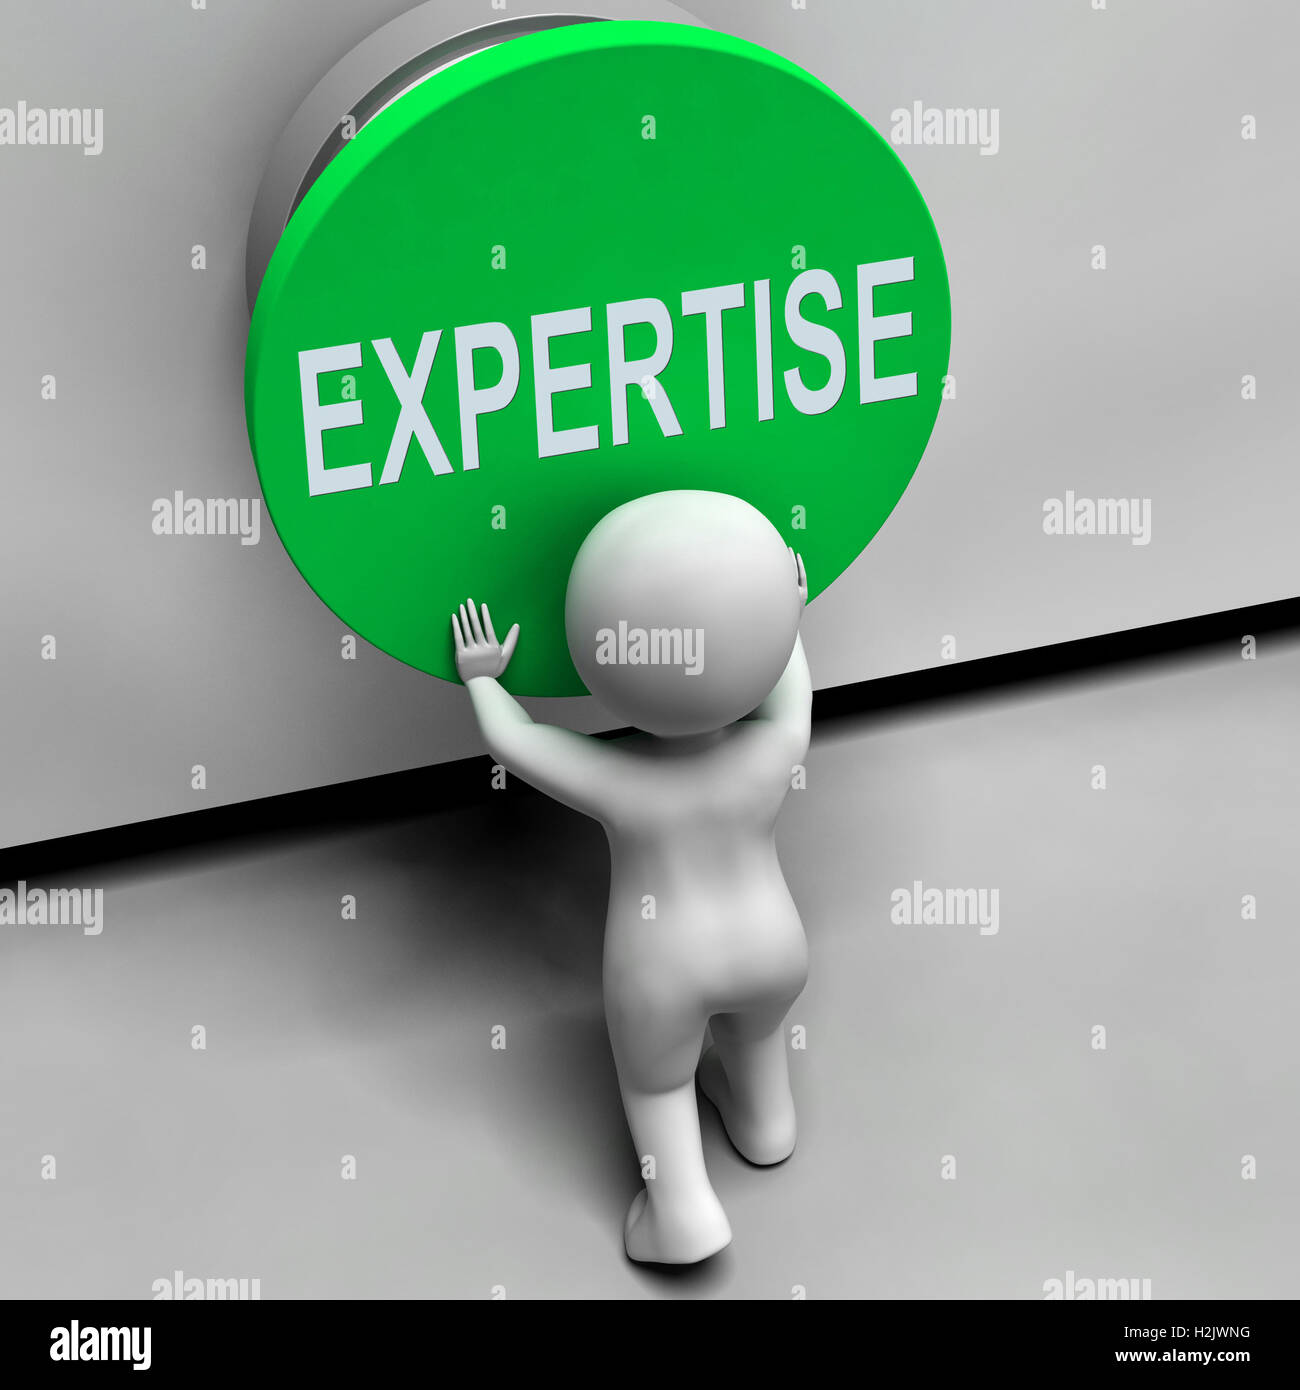 Expertise Button Means Skilled Specialist And Proficiency Stock Photo